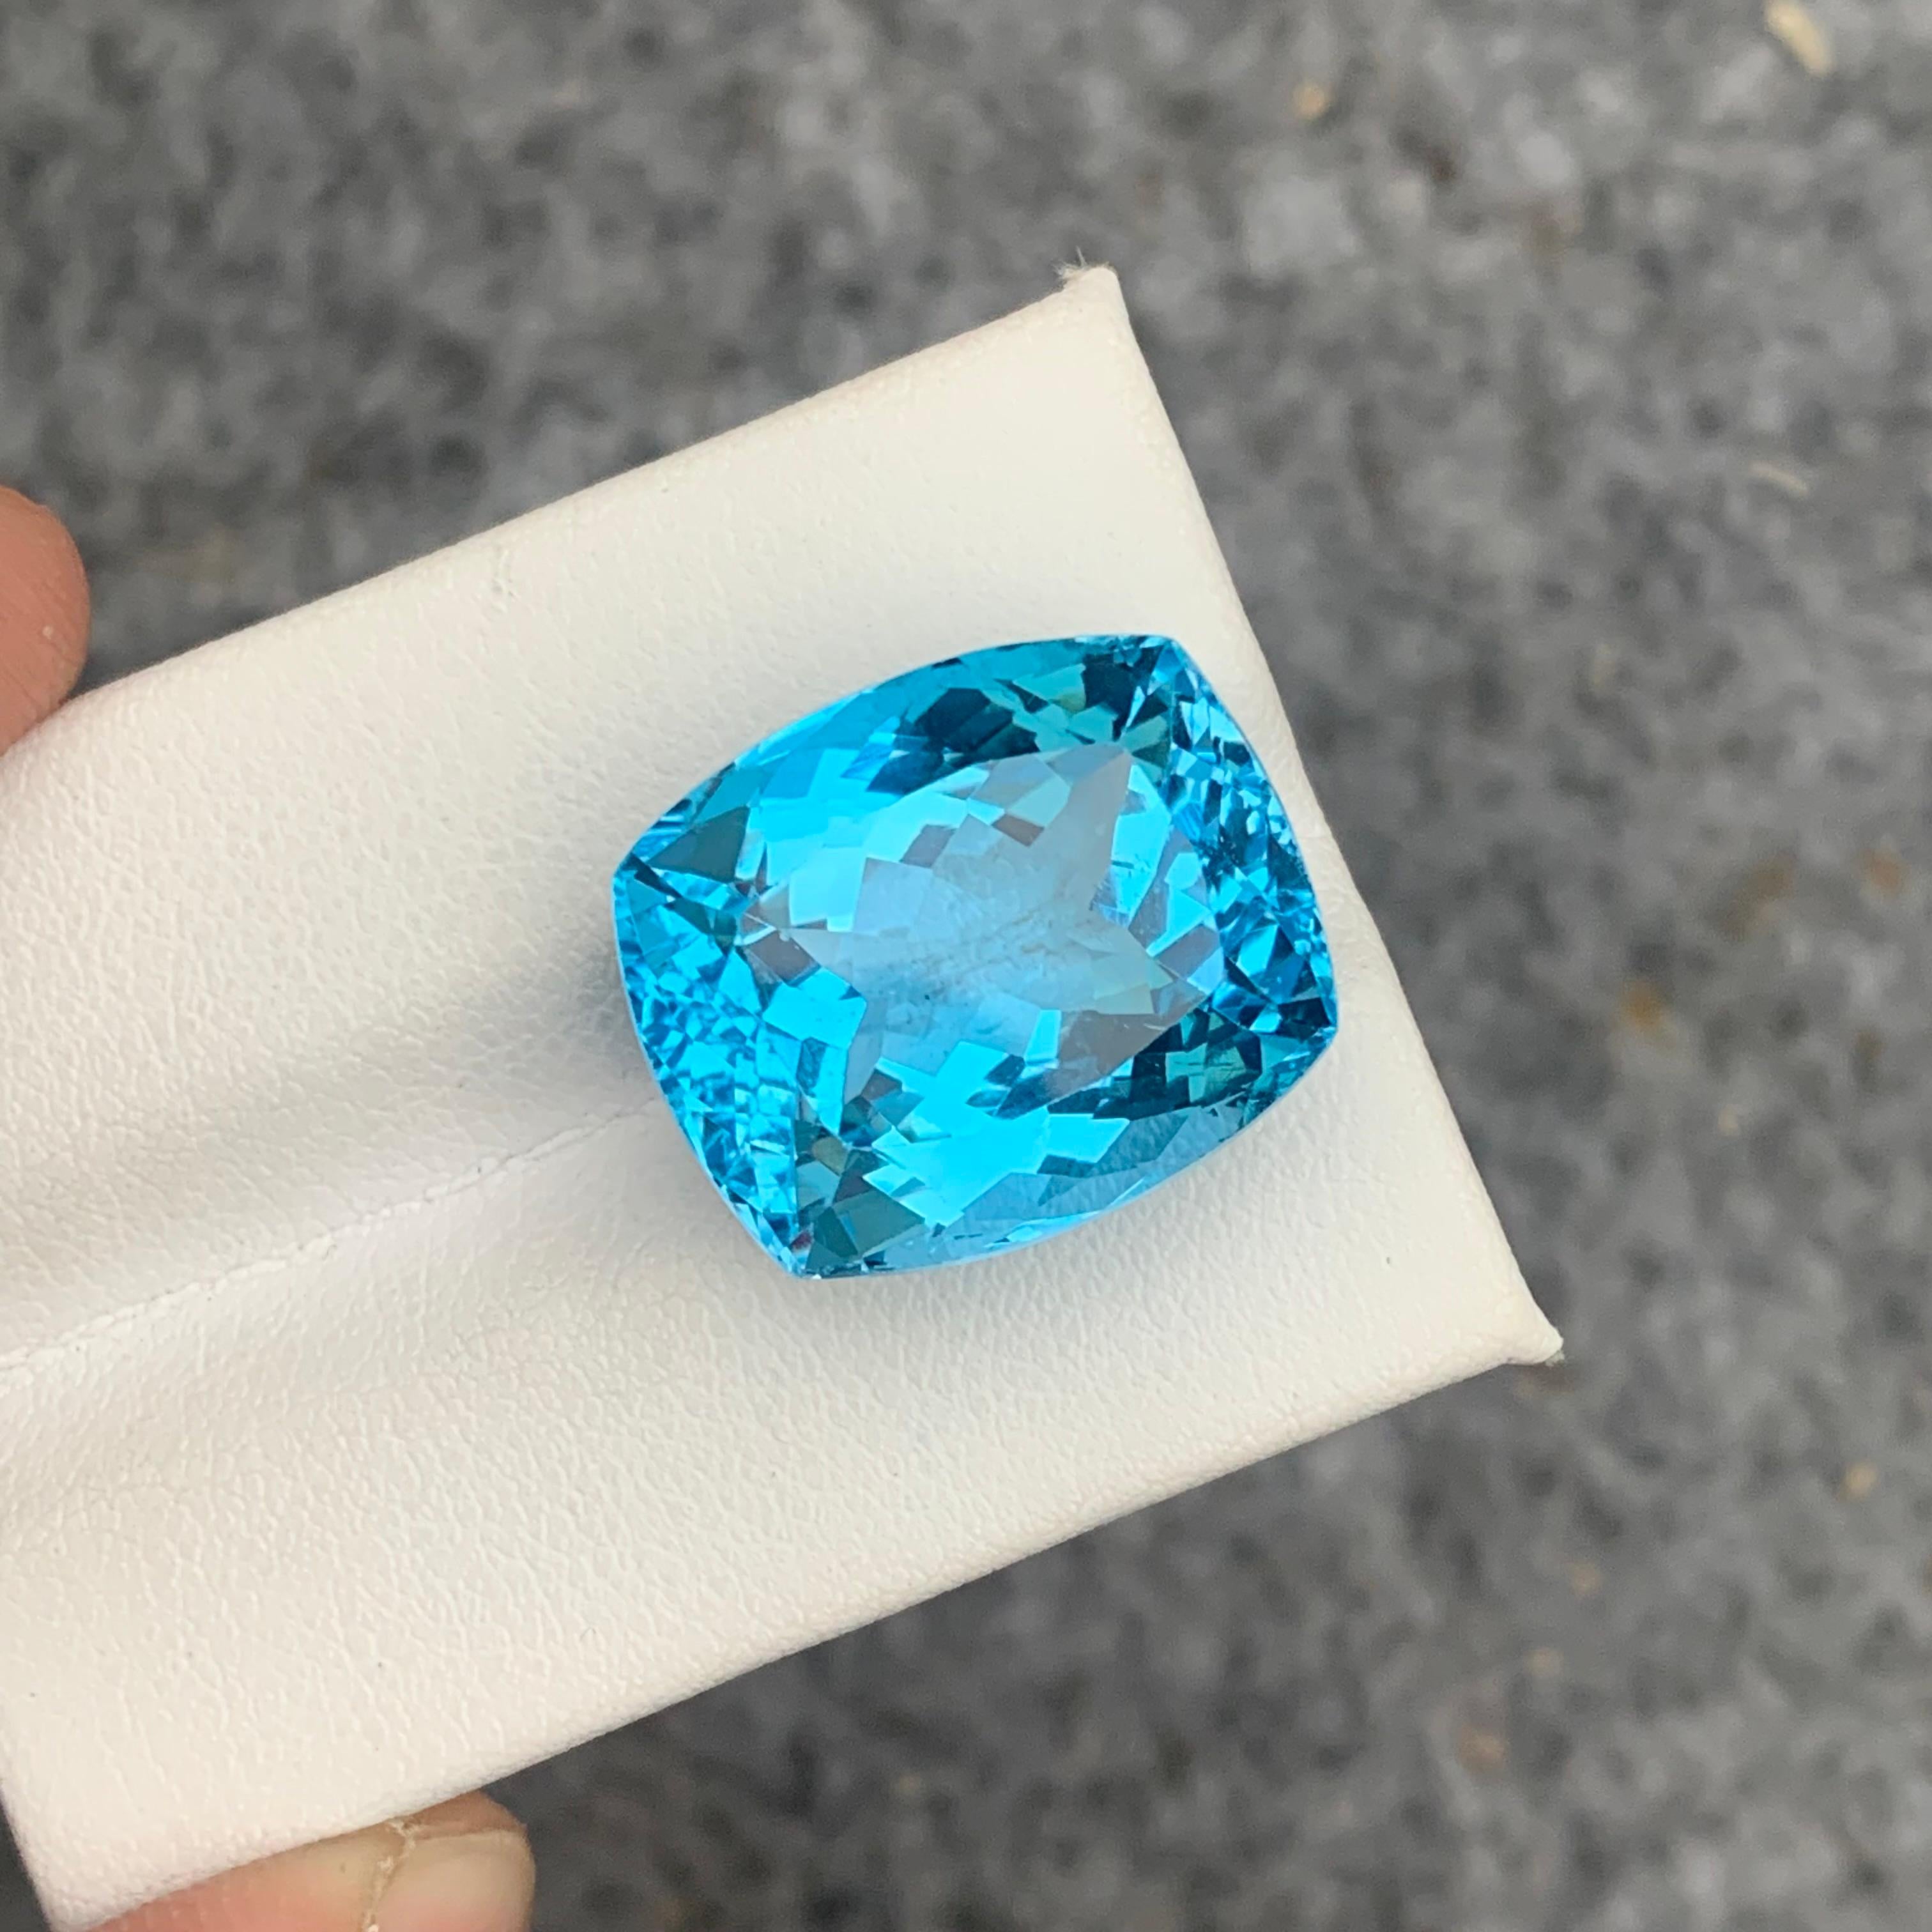 Gorgeous 31.10 Carat Loose Blue Topaz from Brazil Long Cushion Cut for Jewelry 12